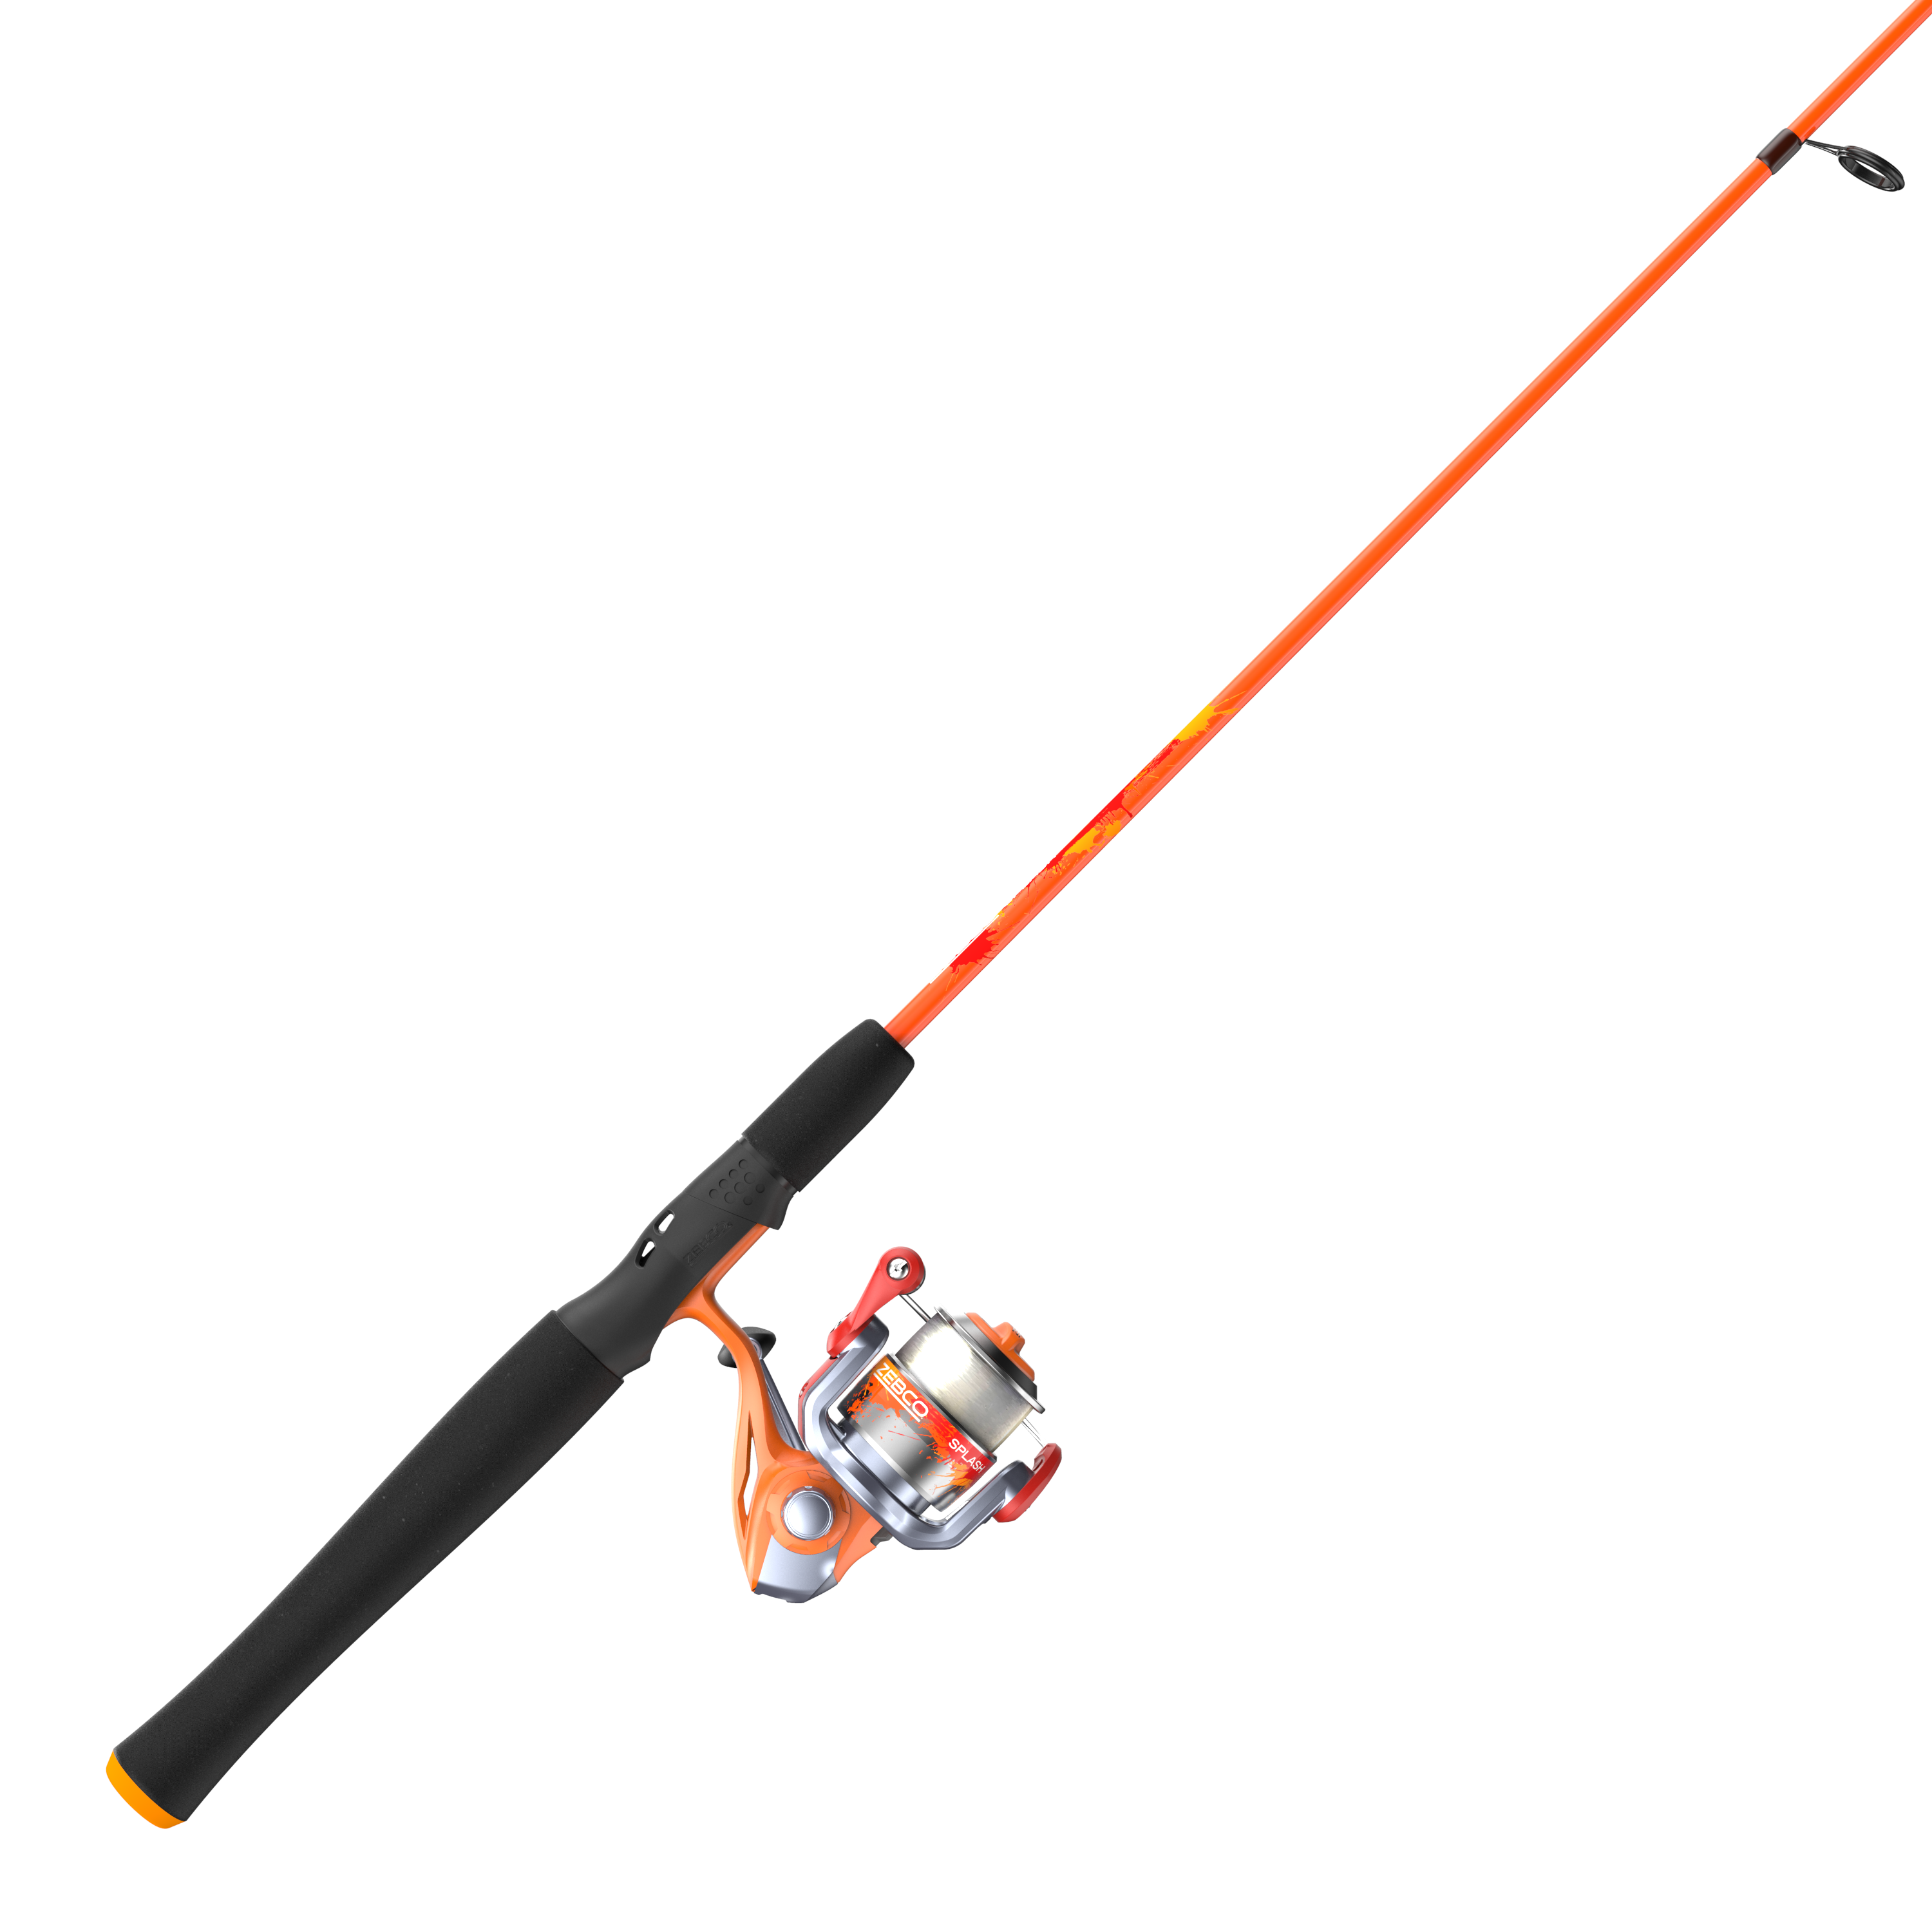 Zebco Slingshot Spin Fishing Combo, Medium, 2-Piece - 5 Ft 6 Inches Length